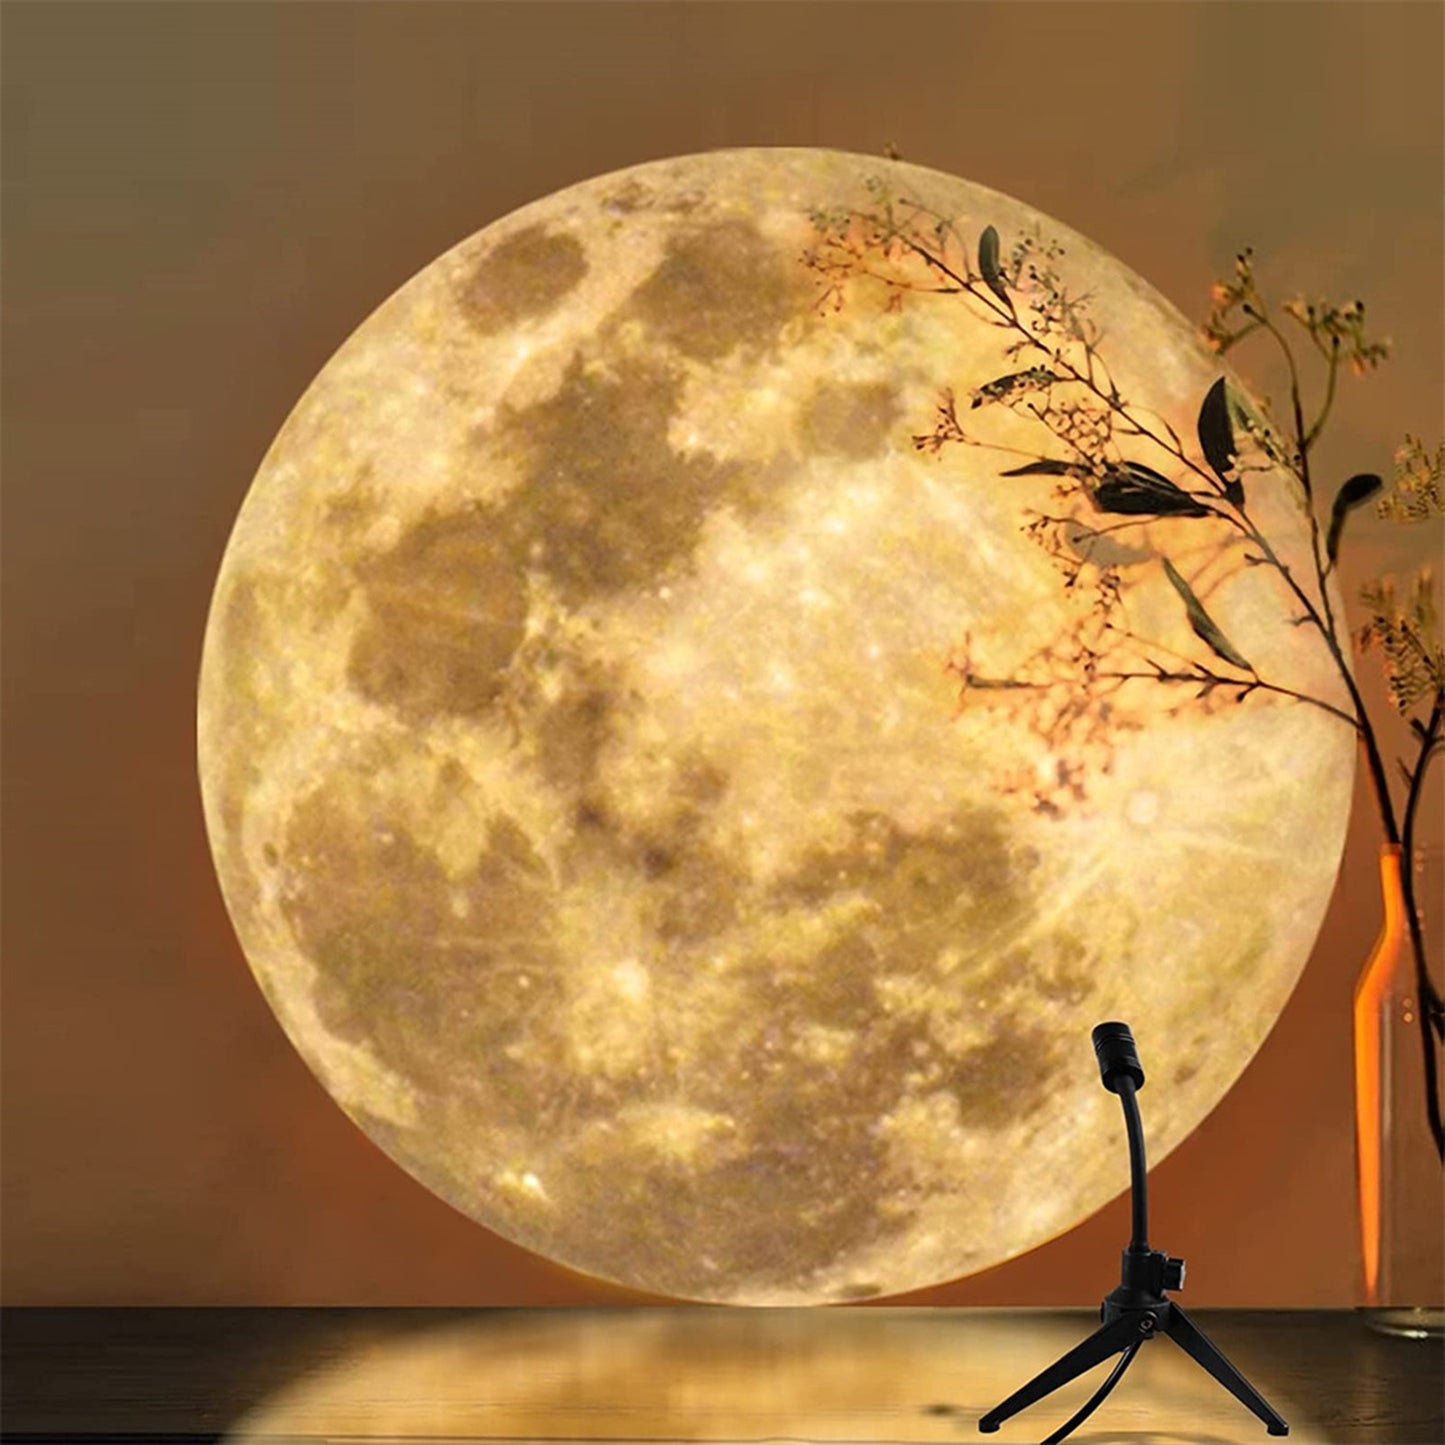 2 In 1 Earth Moon Projection Led Lamp 360° Rotatable USB Starry Sky Projector Night Light For home Bedroom Decor